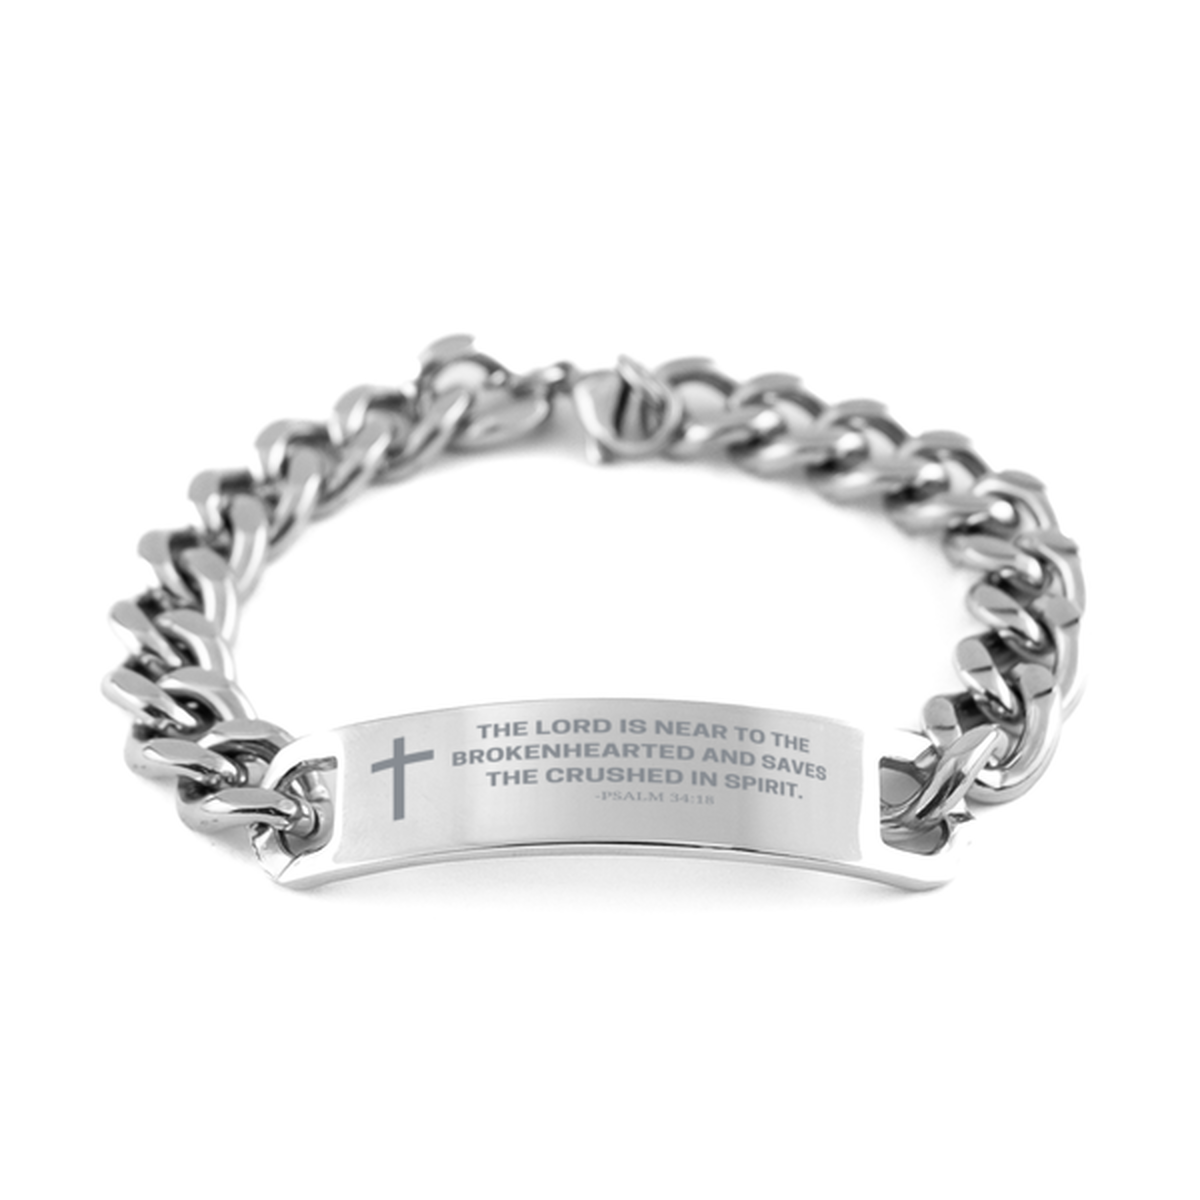 Baptism Gifts For Teenage Boys Girls, Christian Bible Verse Cuban Chain Bracelet, The Lord is near to the brokenhearted, Catholic Confirmation Gifts for Son, Godson, Grandson, Nephew